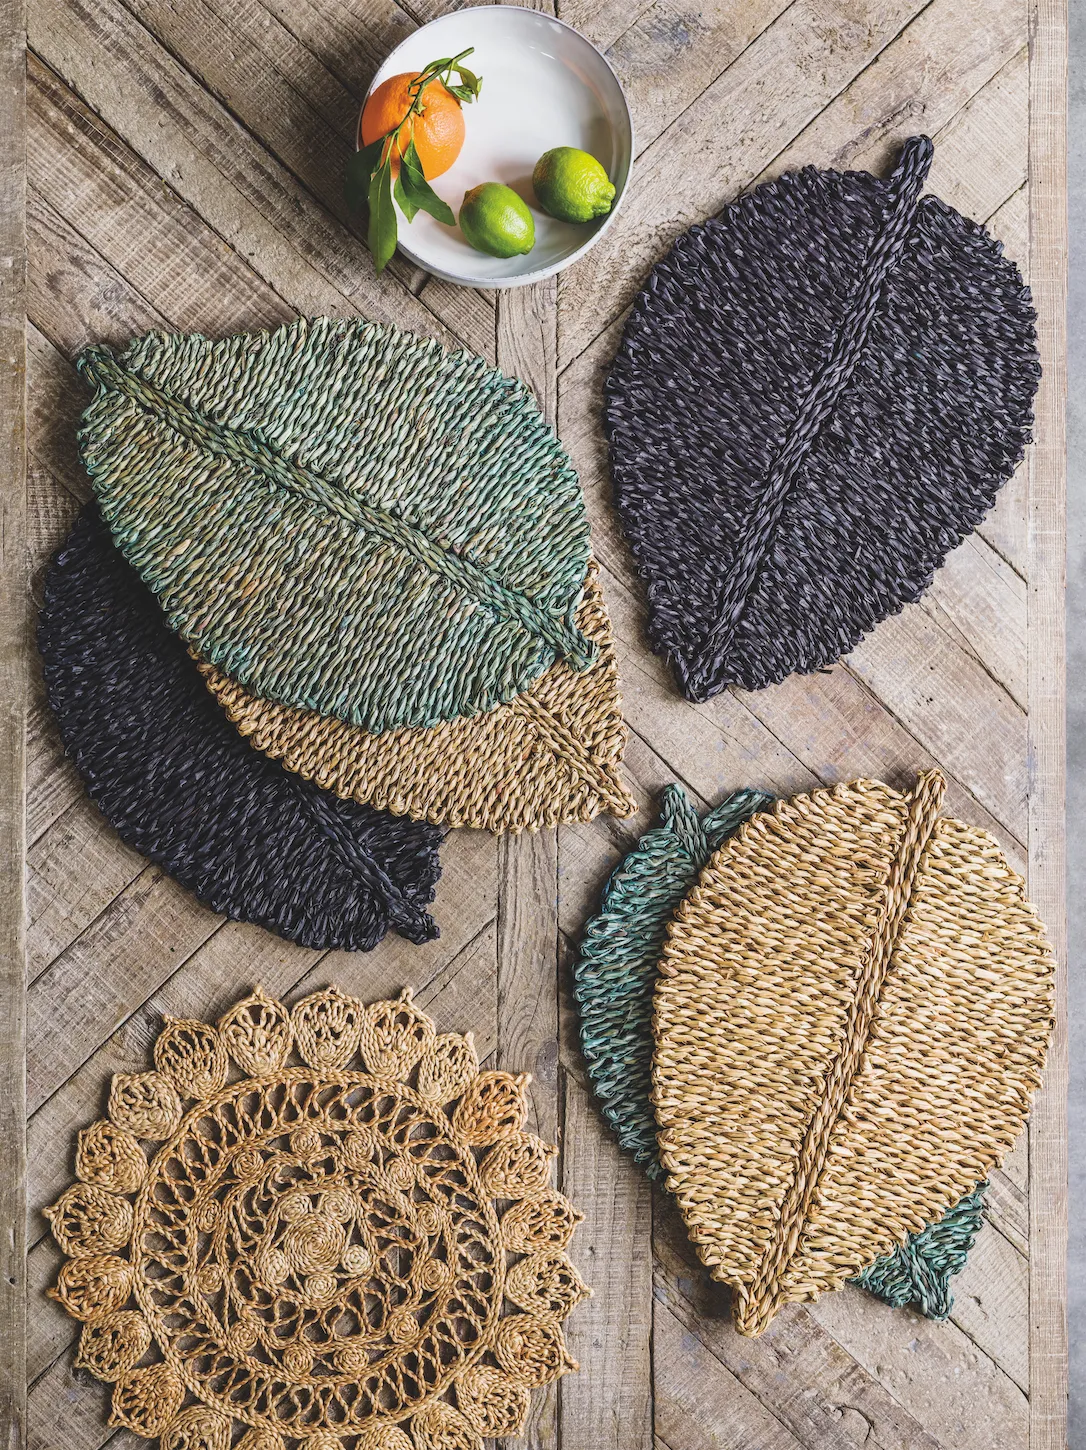 Bring in rustic textures and leaf motifs with these autumnal placemats.